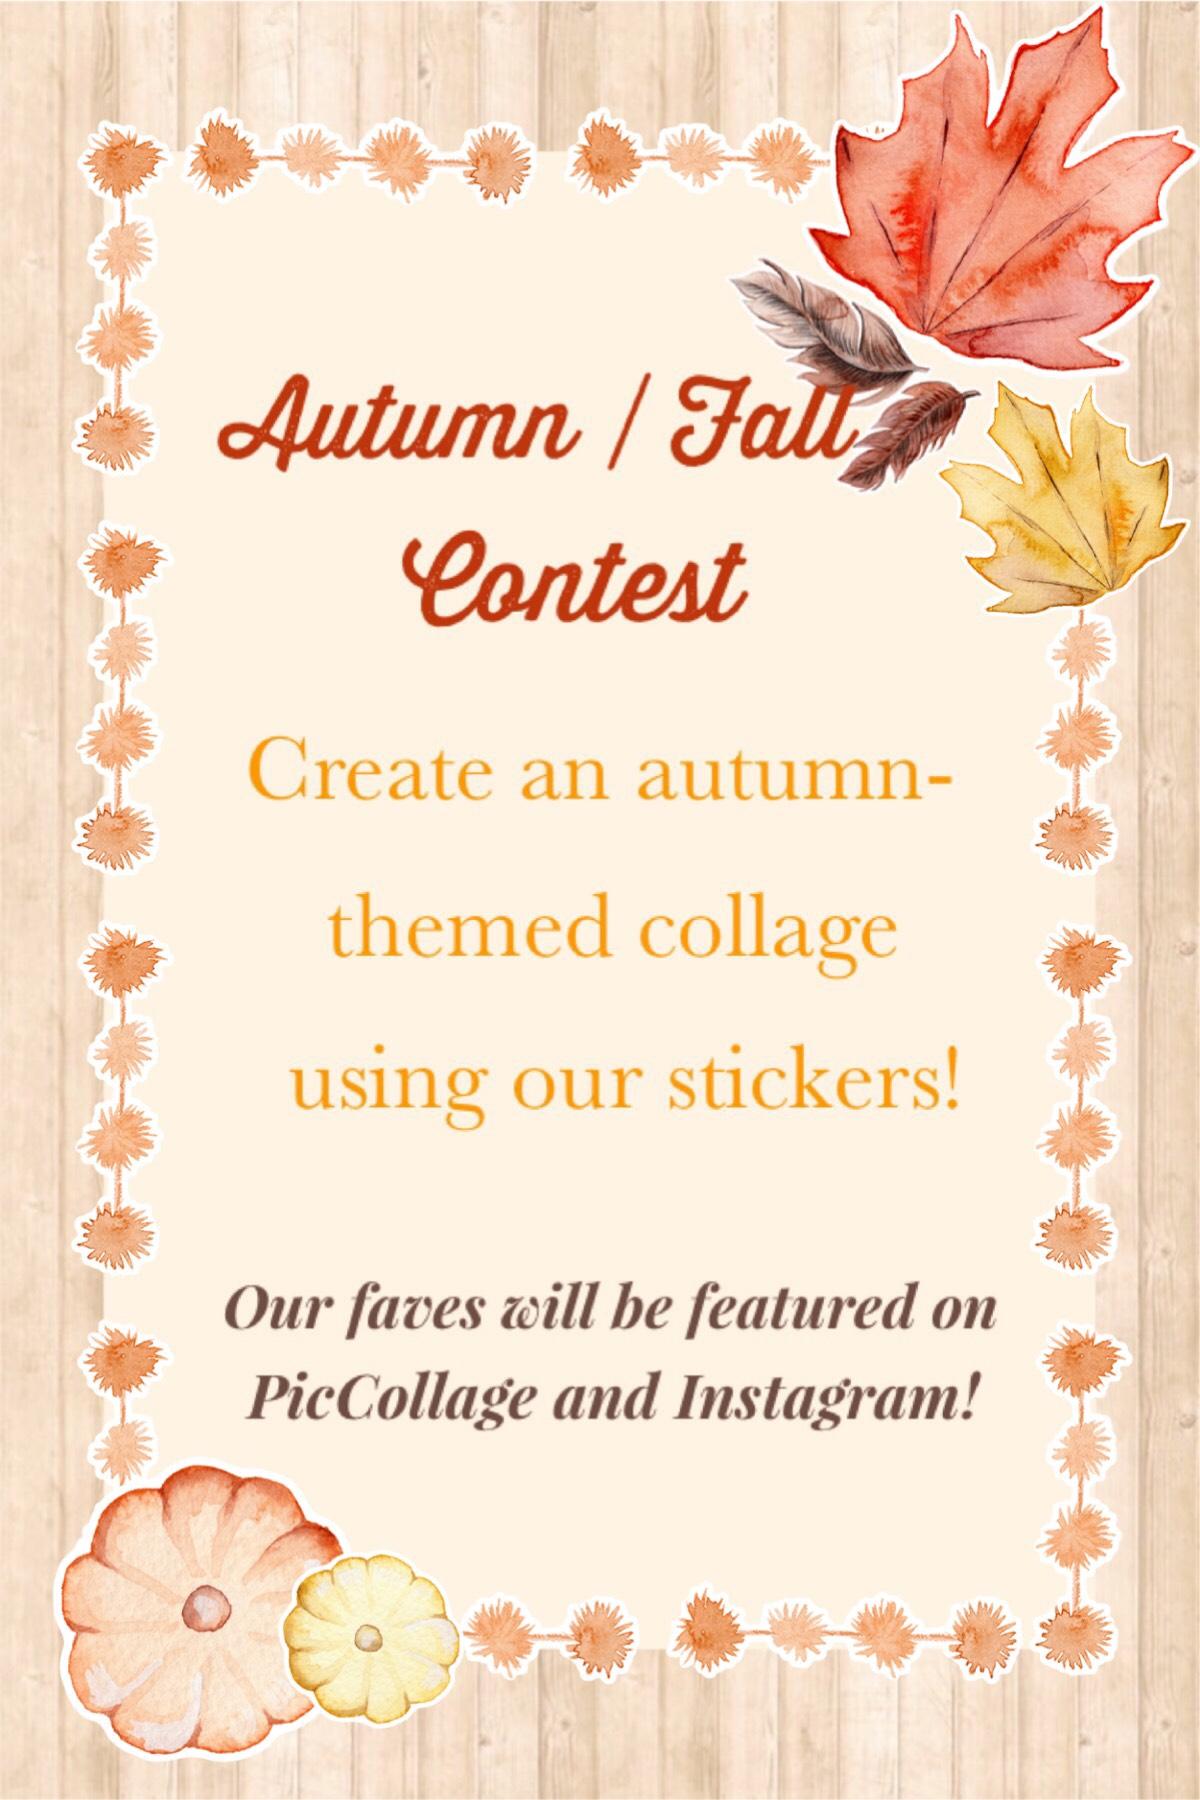 Check out our Autumn/ Fall Contest! Deadline is October 4, 2018 🍁